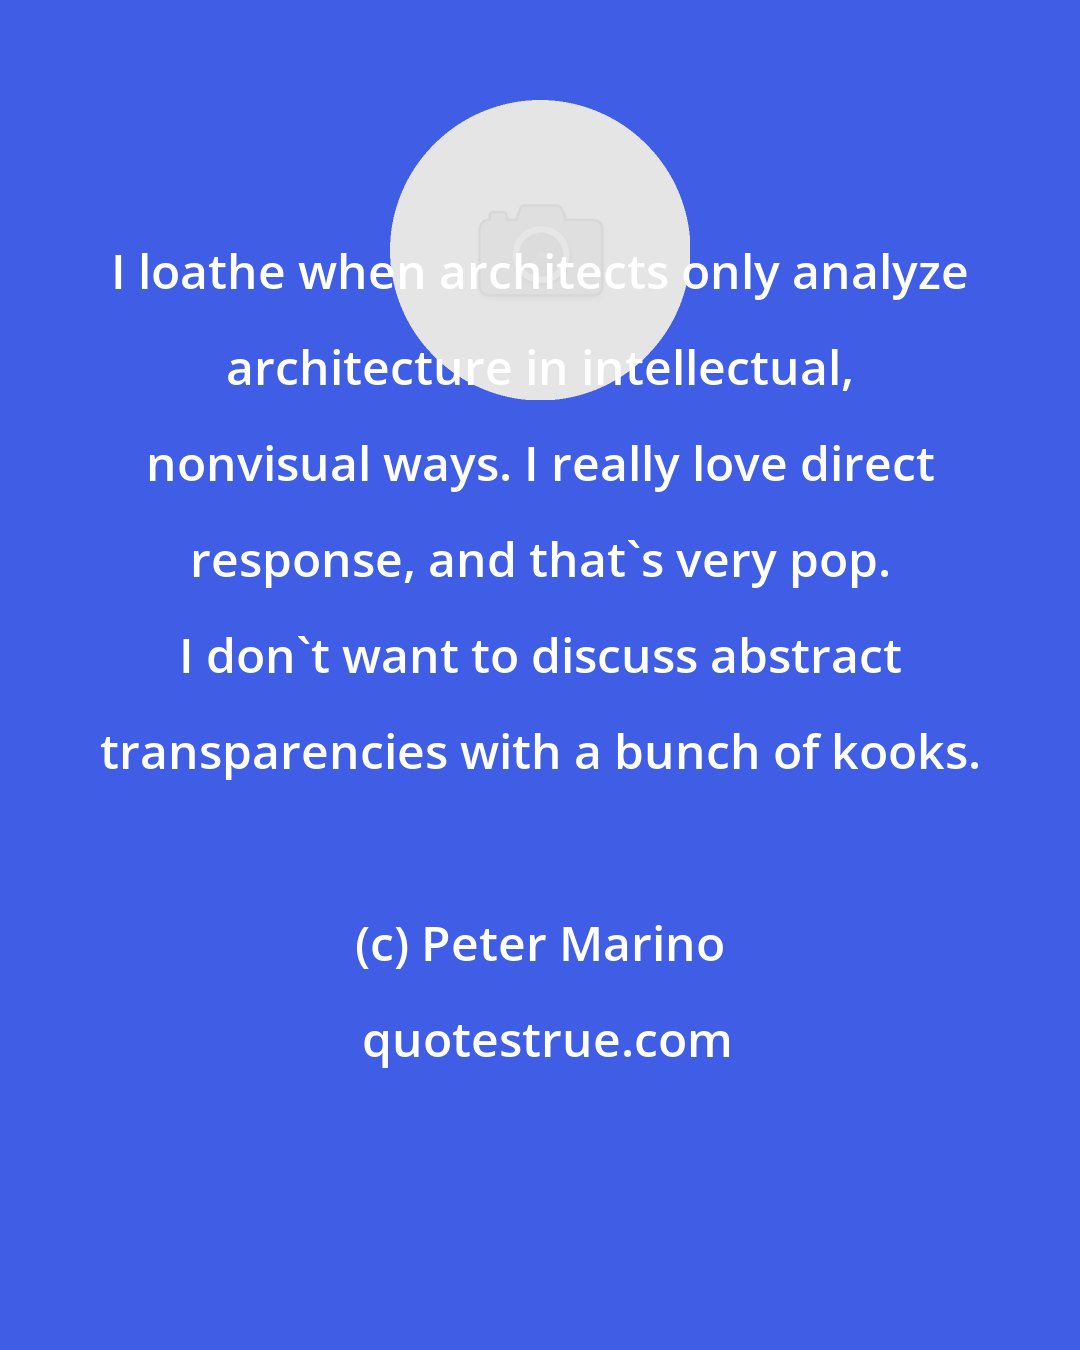 Peter Marino: I loathe when architects only analyze architecture in intellectual, nonvisual ways. I really love direct response, and that's very pop. I don't want to discuss abstract transparencies with a bunch of kooks.